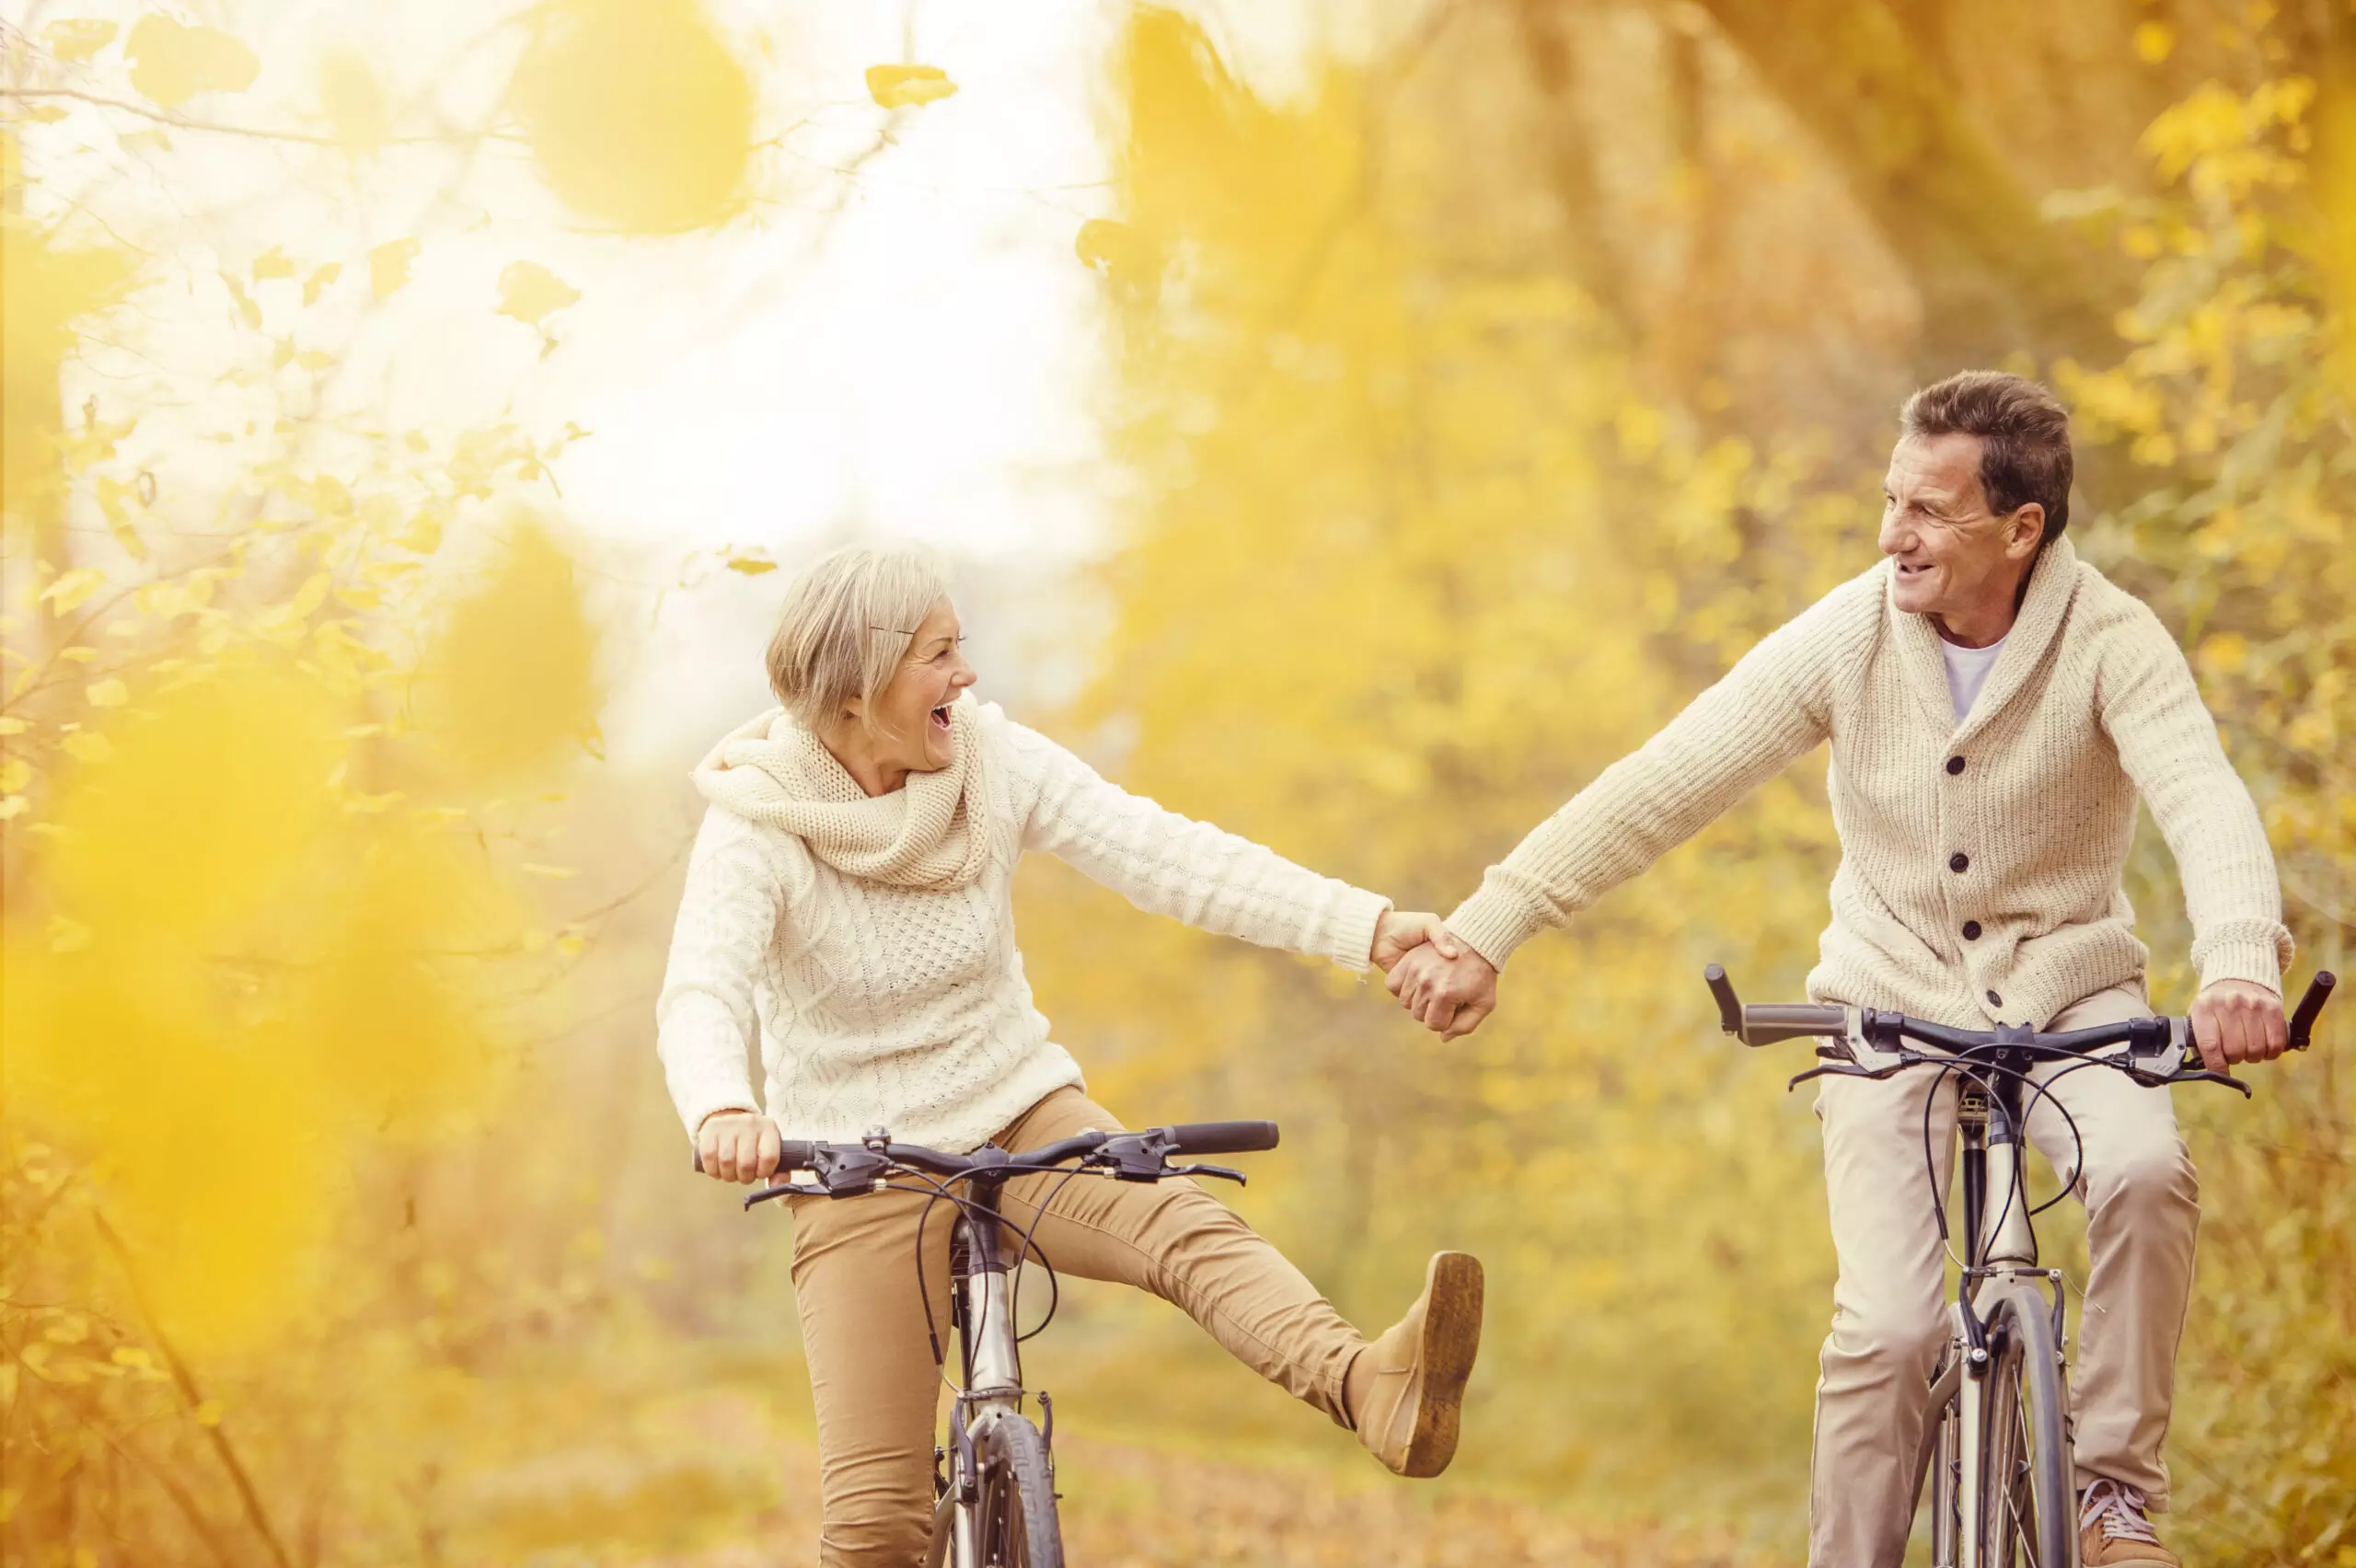 Couple biking and laughing in autumn scenery